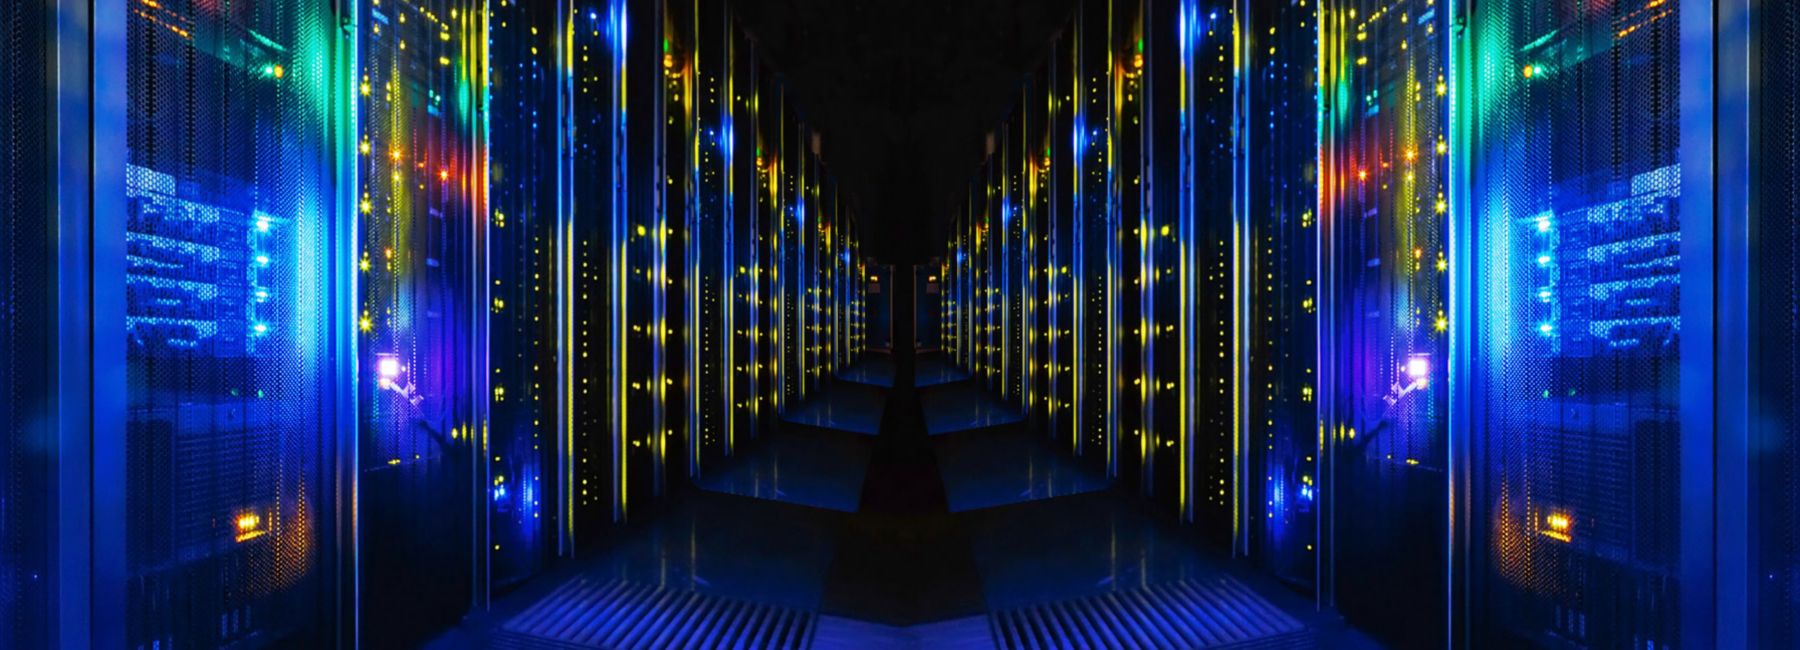 Modernizing your mainframe? Here’s how to do cloud the right way